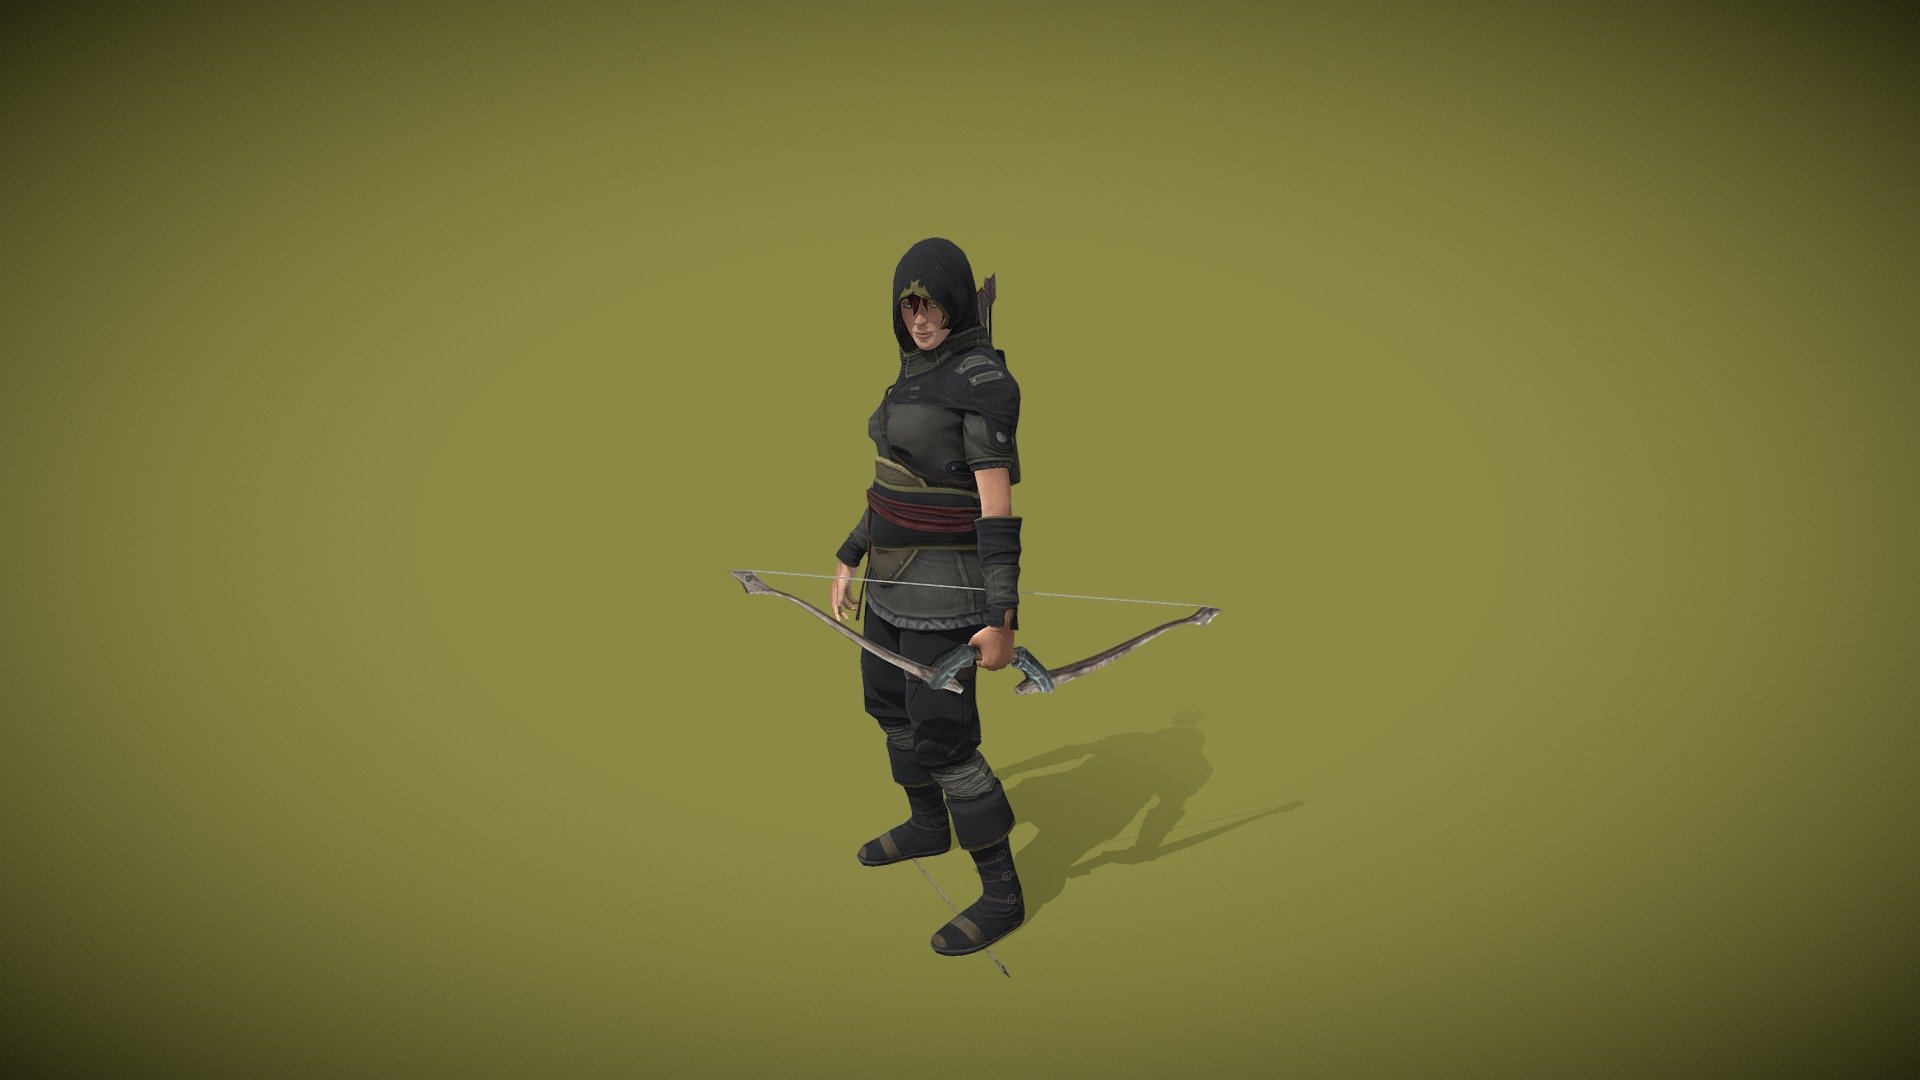 Archer character pulls an arrow from his quiver and shoots it with his bow in this 5 second animation at 30 frames a second.

See this 3D model in fighting action in the AR Fight Club app for Android, available on Google Play:

https://play.google.com/store/apps/details?id=com.arfightclub.app

Choose your fighting characters, point your phone at the top of a table or desk and watch them battle! Move around the fighters and view from any angle. Hear the spatial sound effects of battle. Join the AR Fight Club today! - Archer Shooting Arrow from Bow in Battle - 3D model by LasquetiSpice 3d model